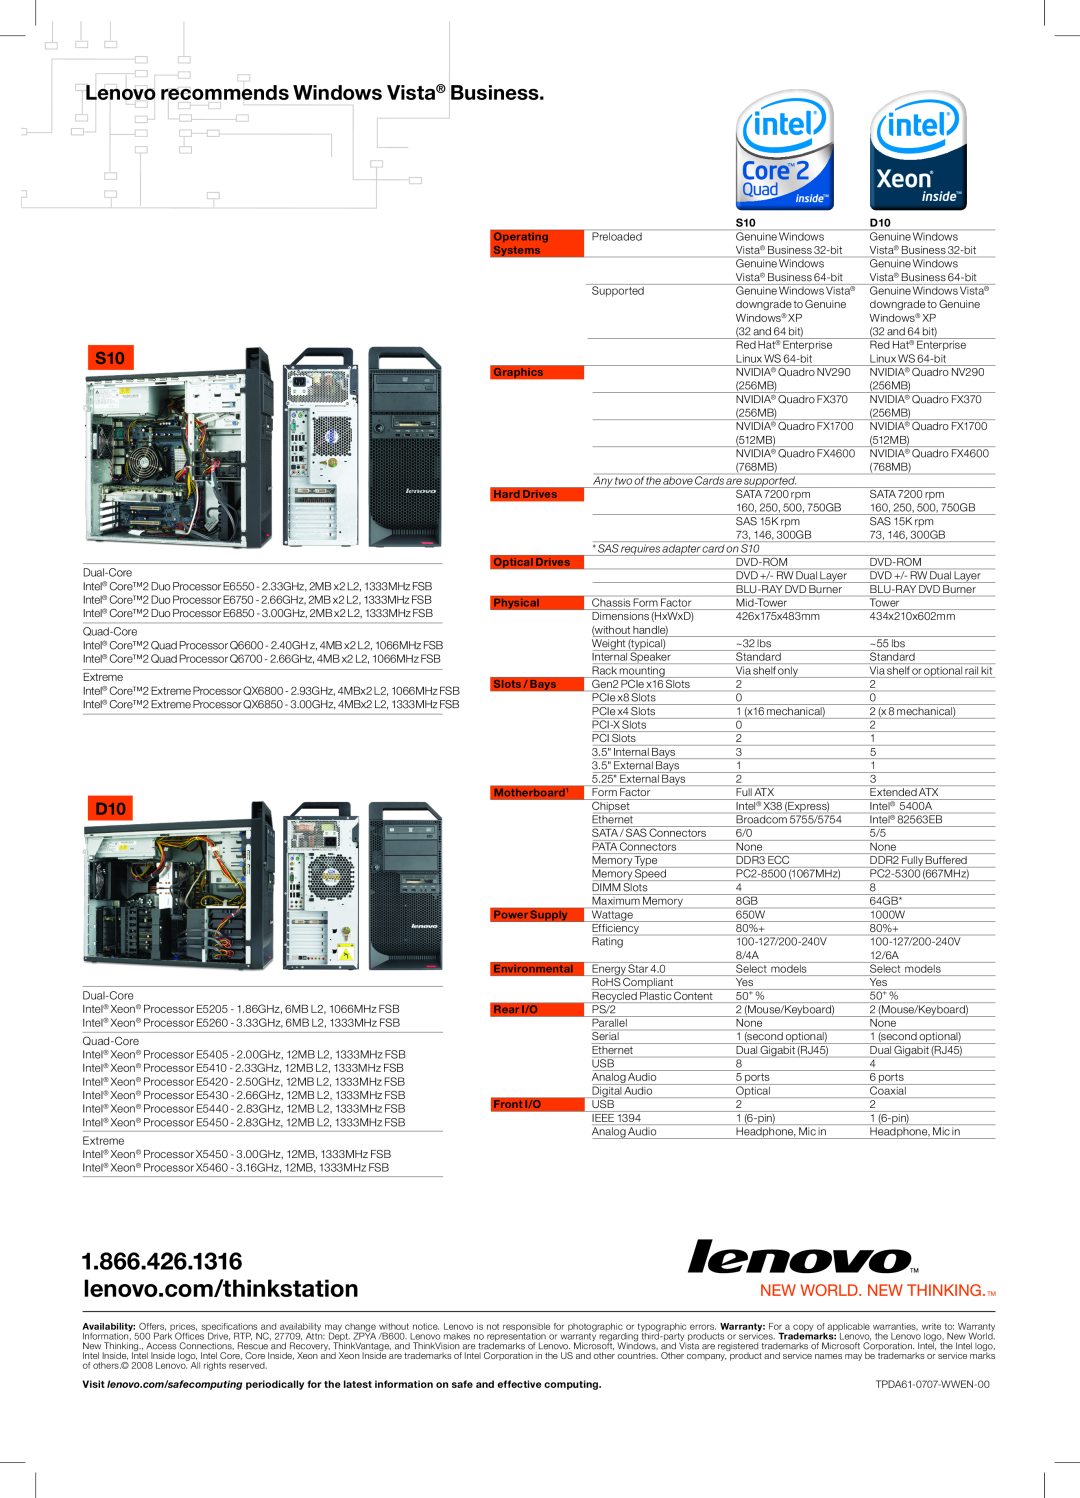 Lenovo S10, D10 manual Lenovo recommends Windows Vista Business, Any two of the above Cards are supported 